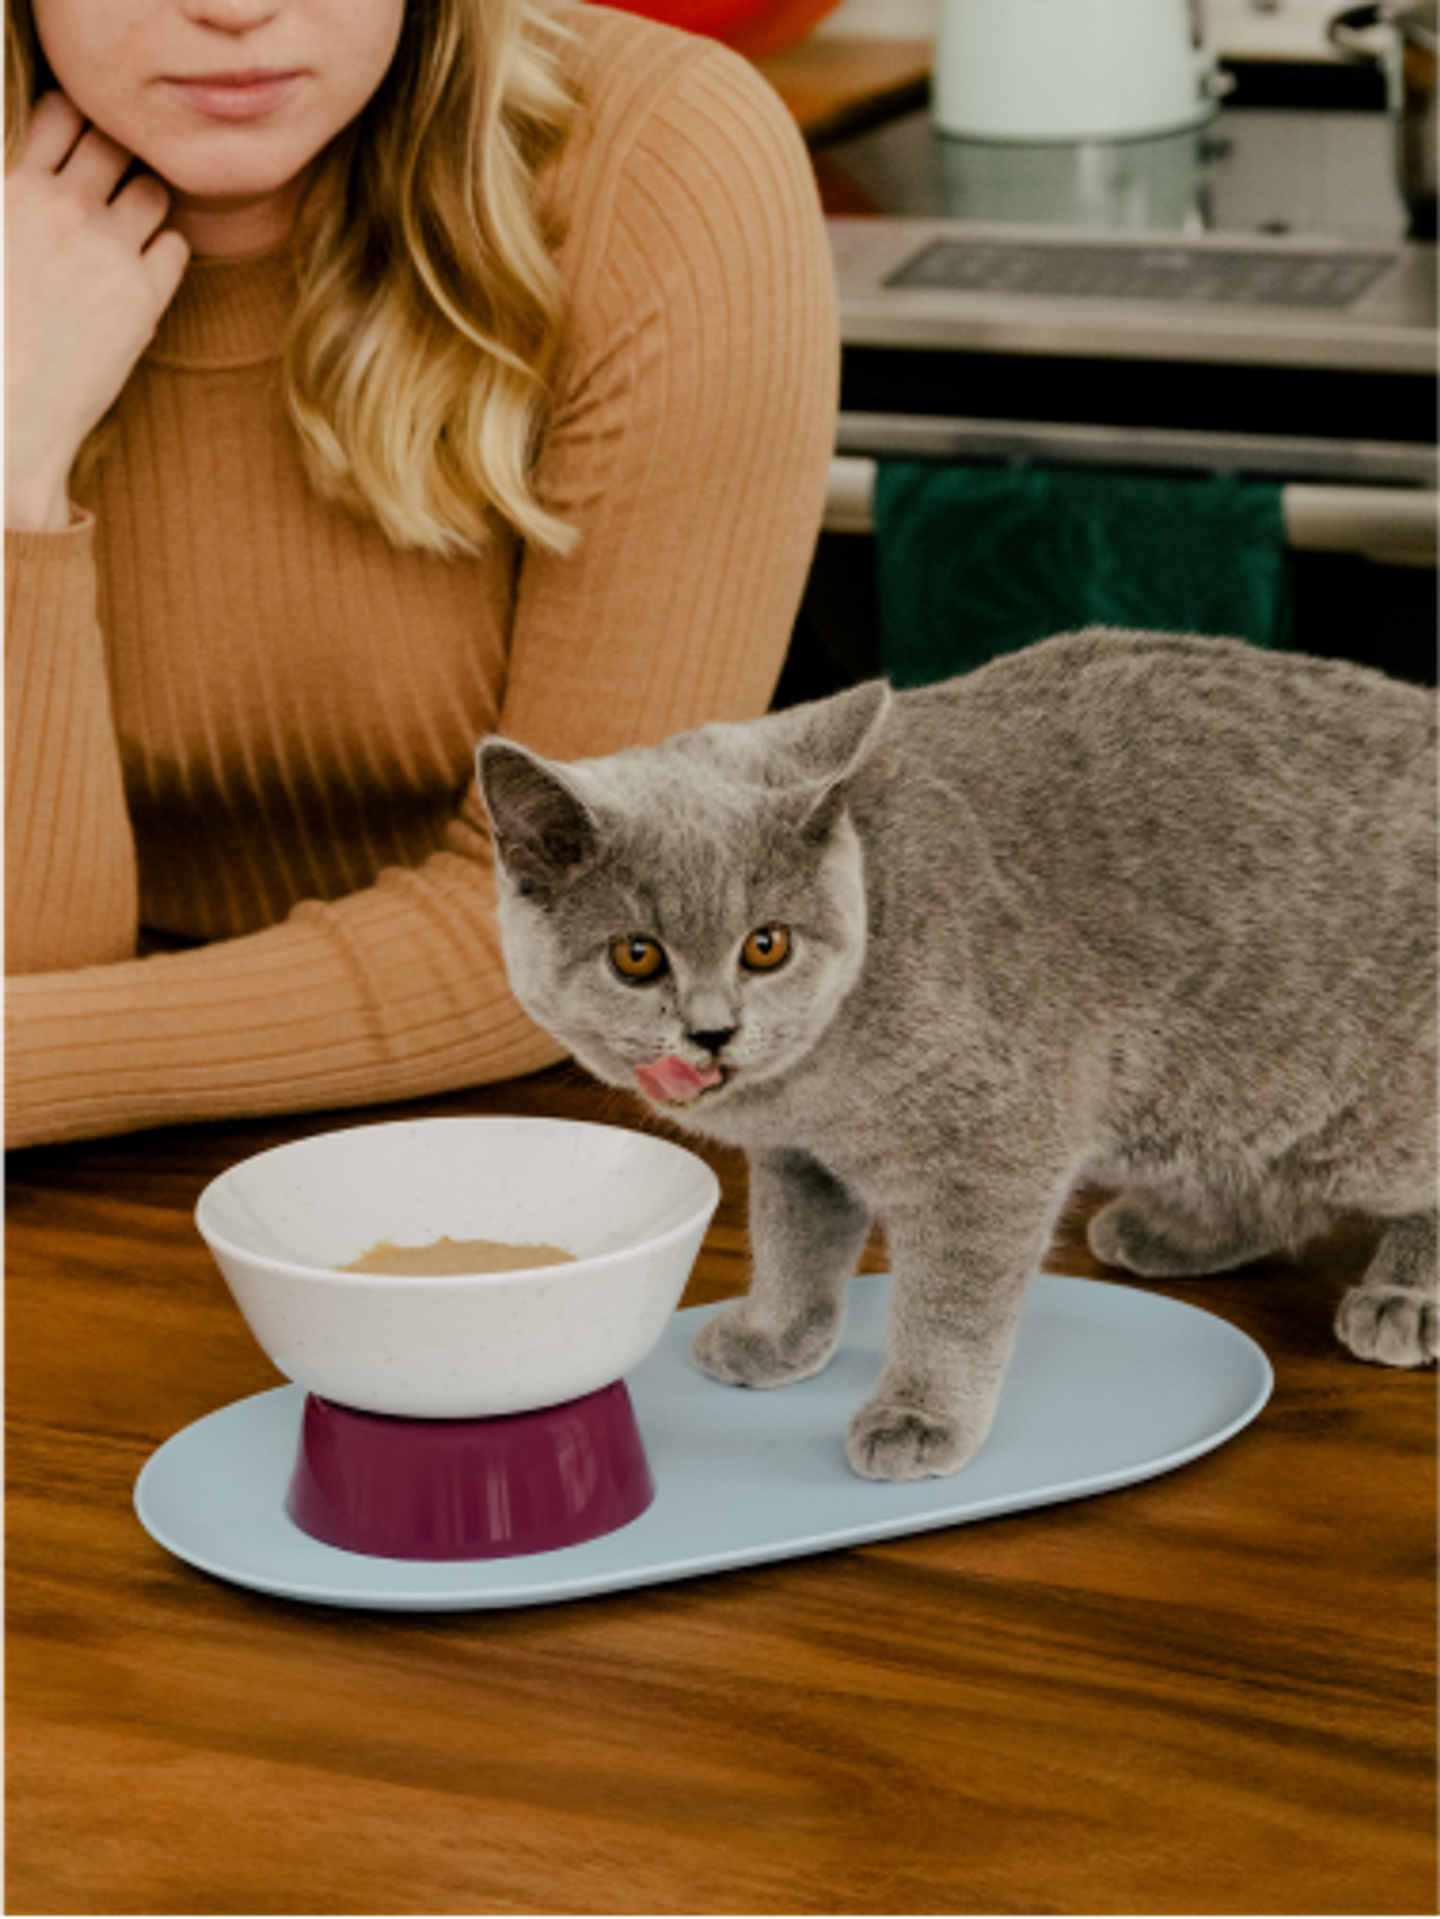 Maine coon kitten licking Cat Person Goodness Blends healthy cat treats out of a Cat Person Mesa Bowl on kitchen counter with woman looking from background